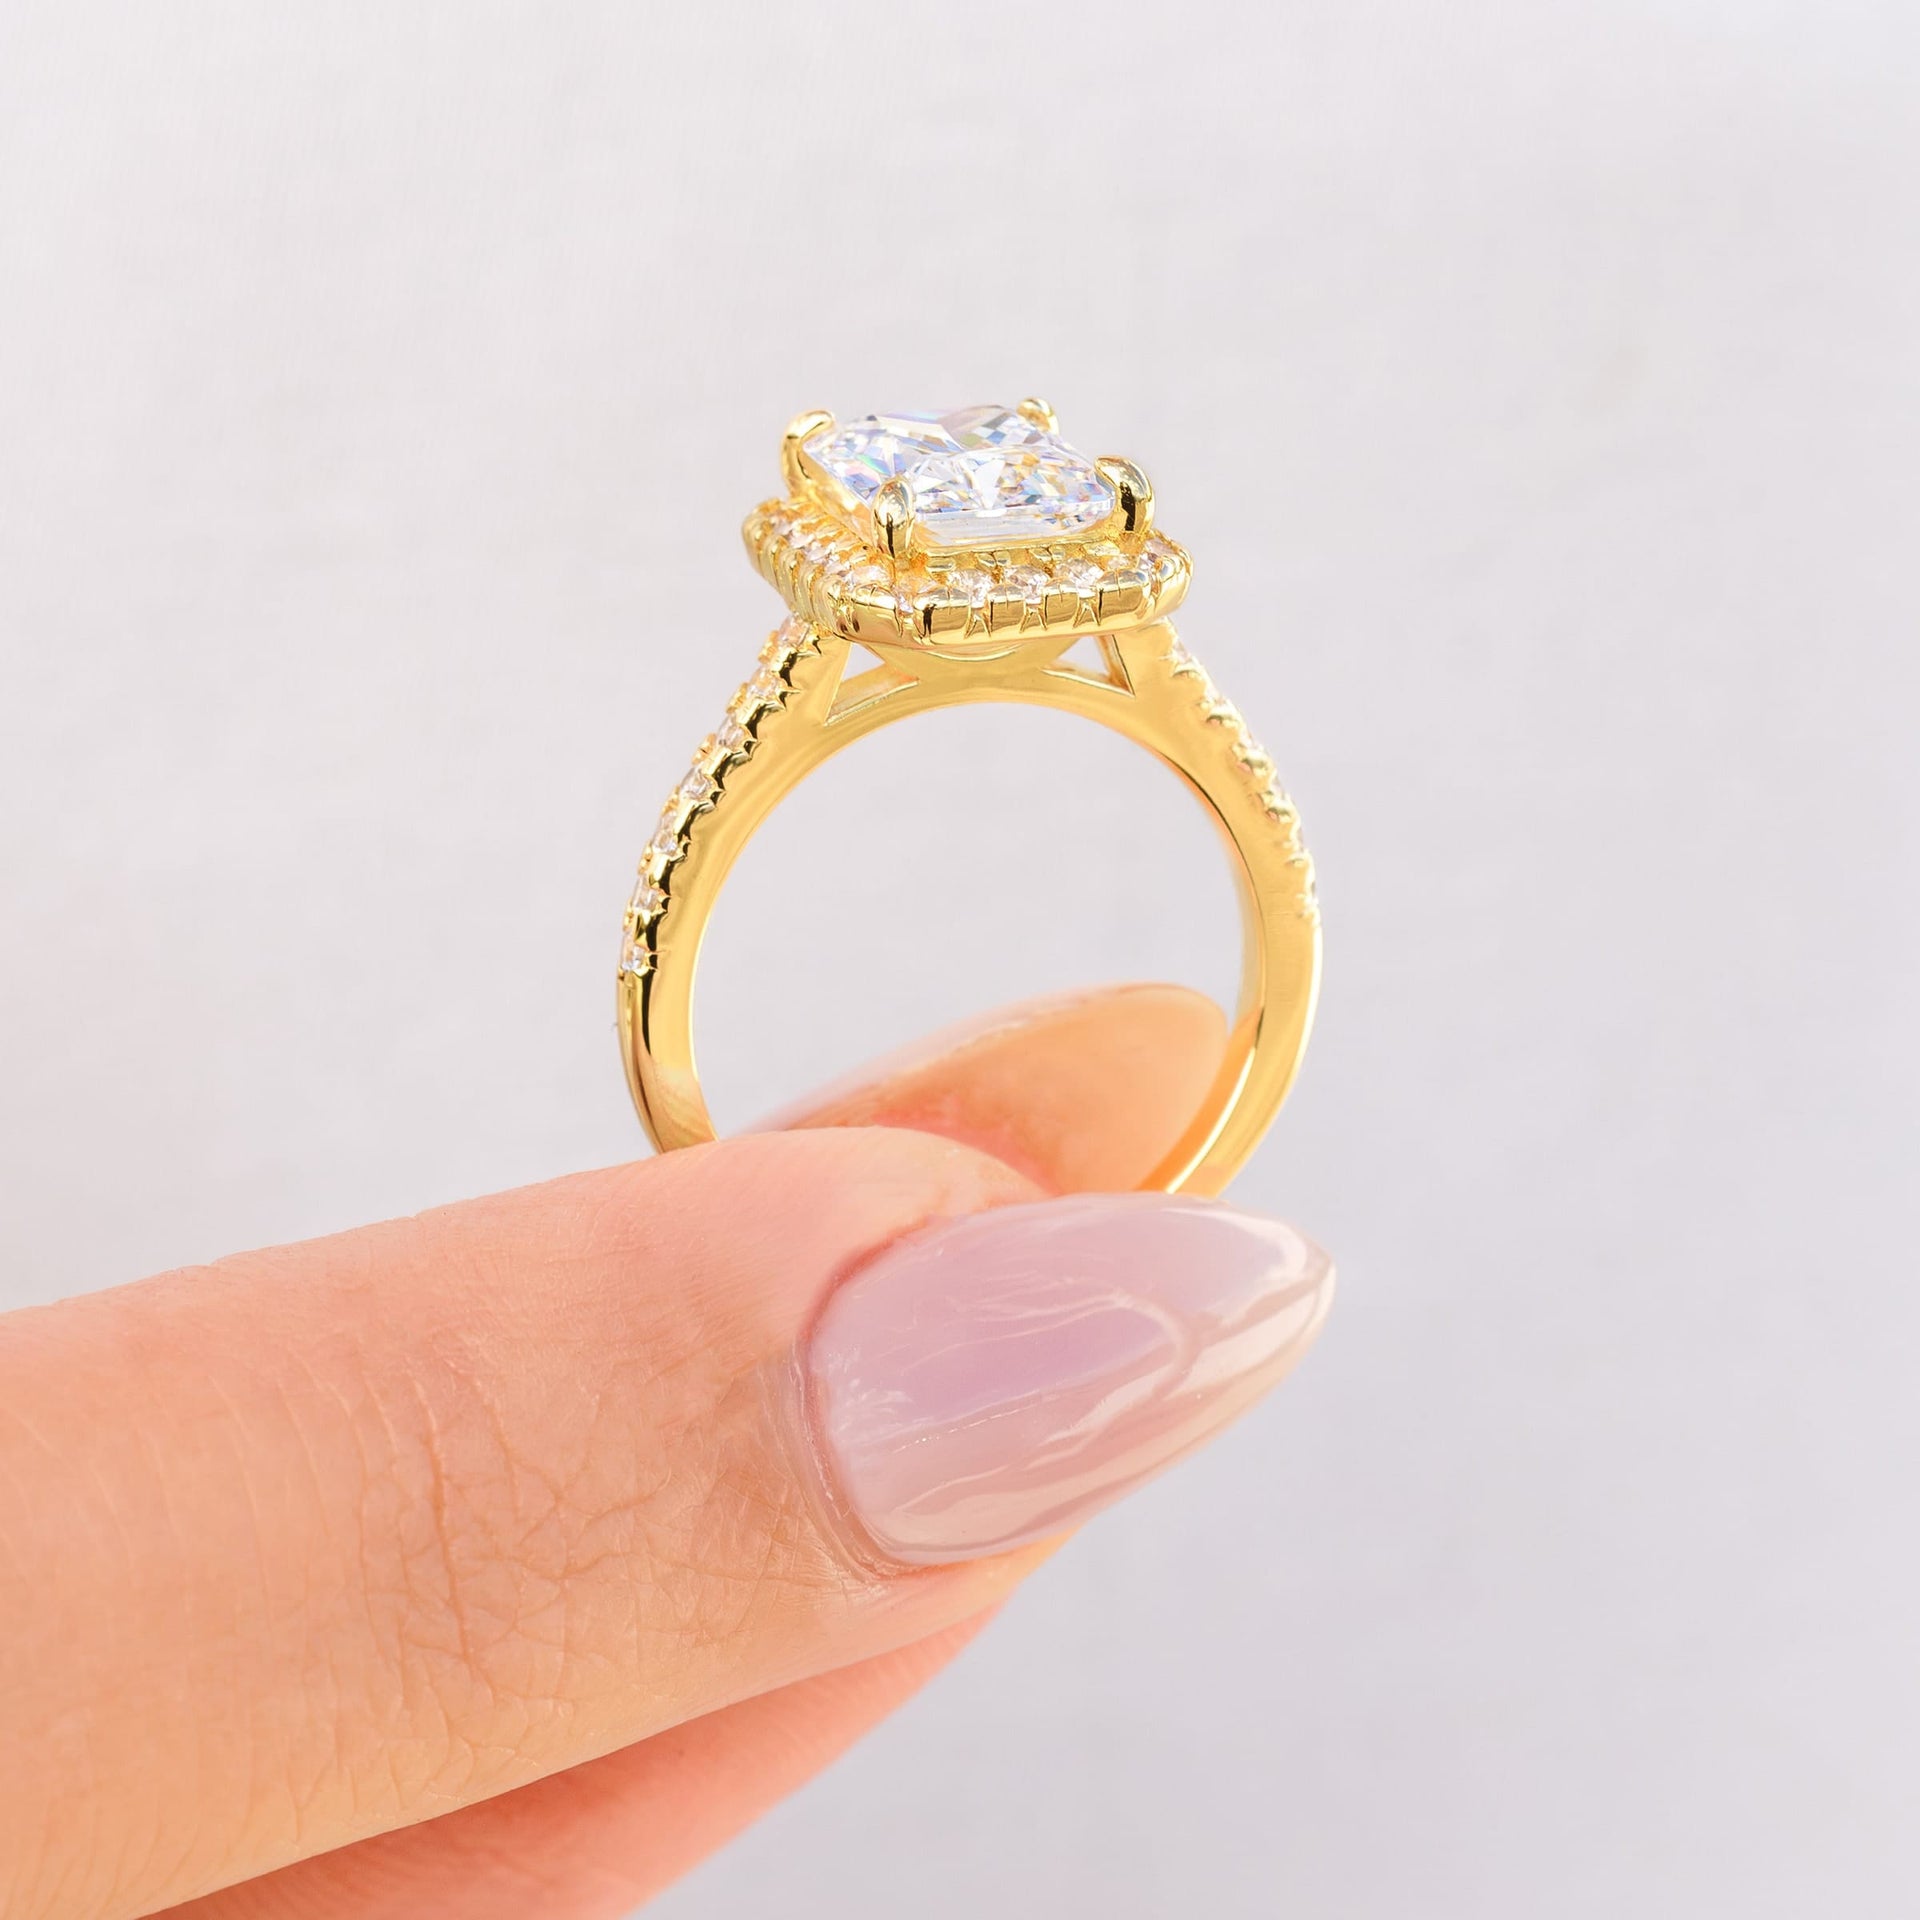 woman pinching gold engagement ring setting with halo